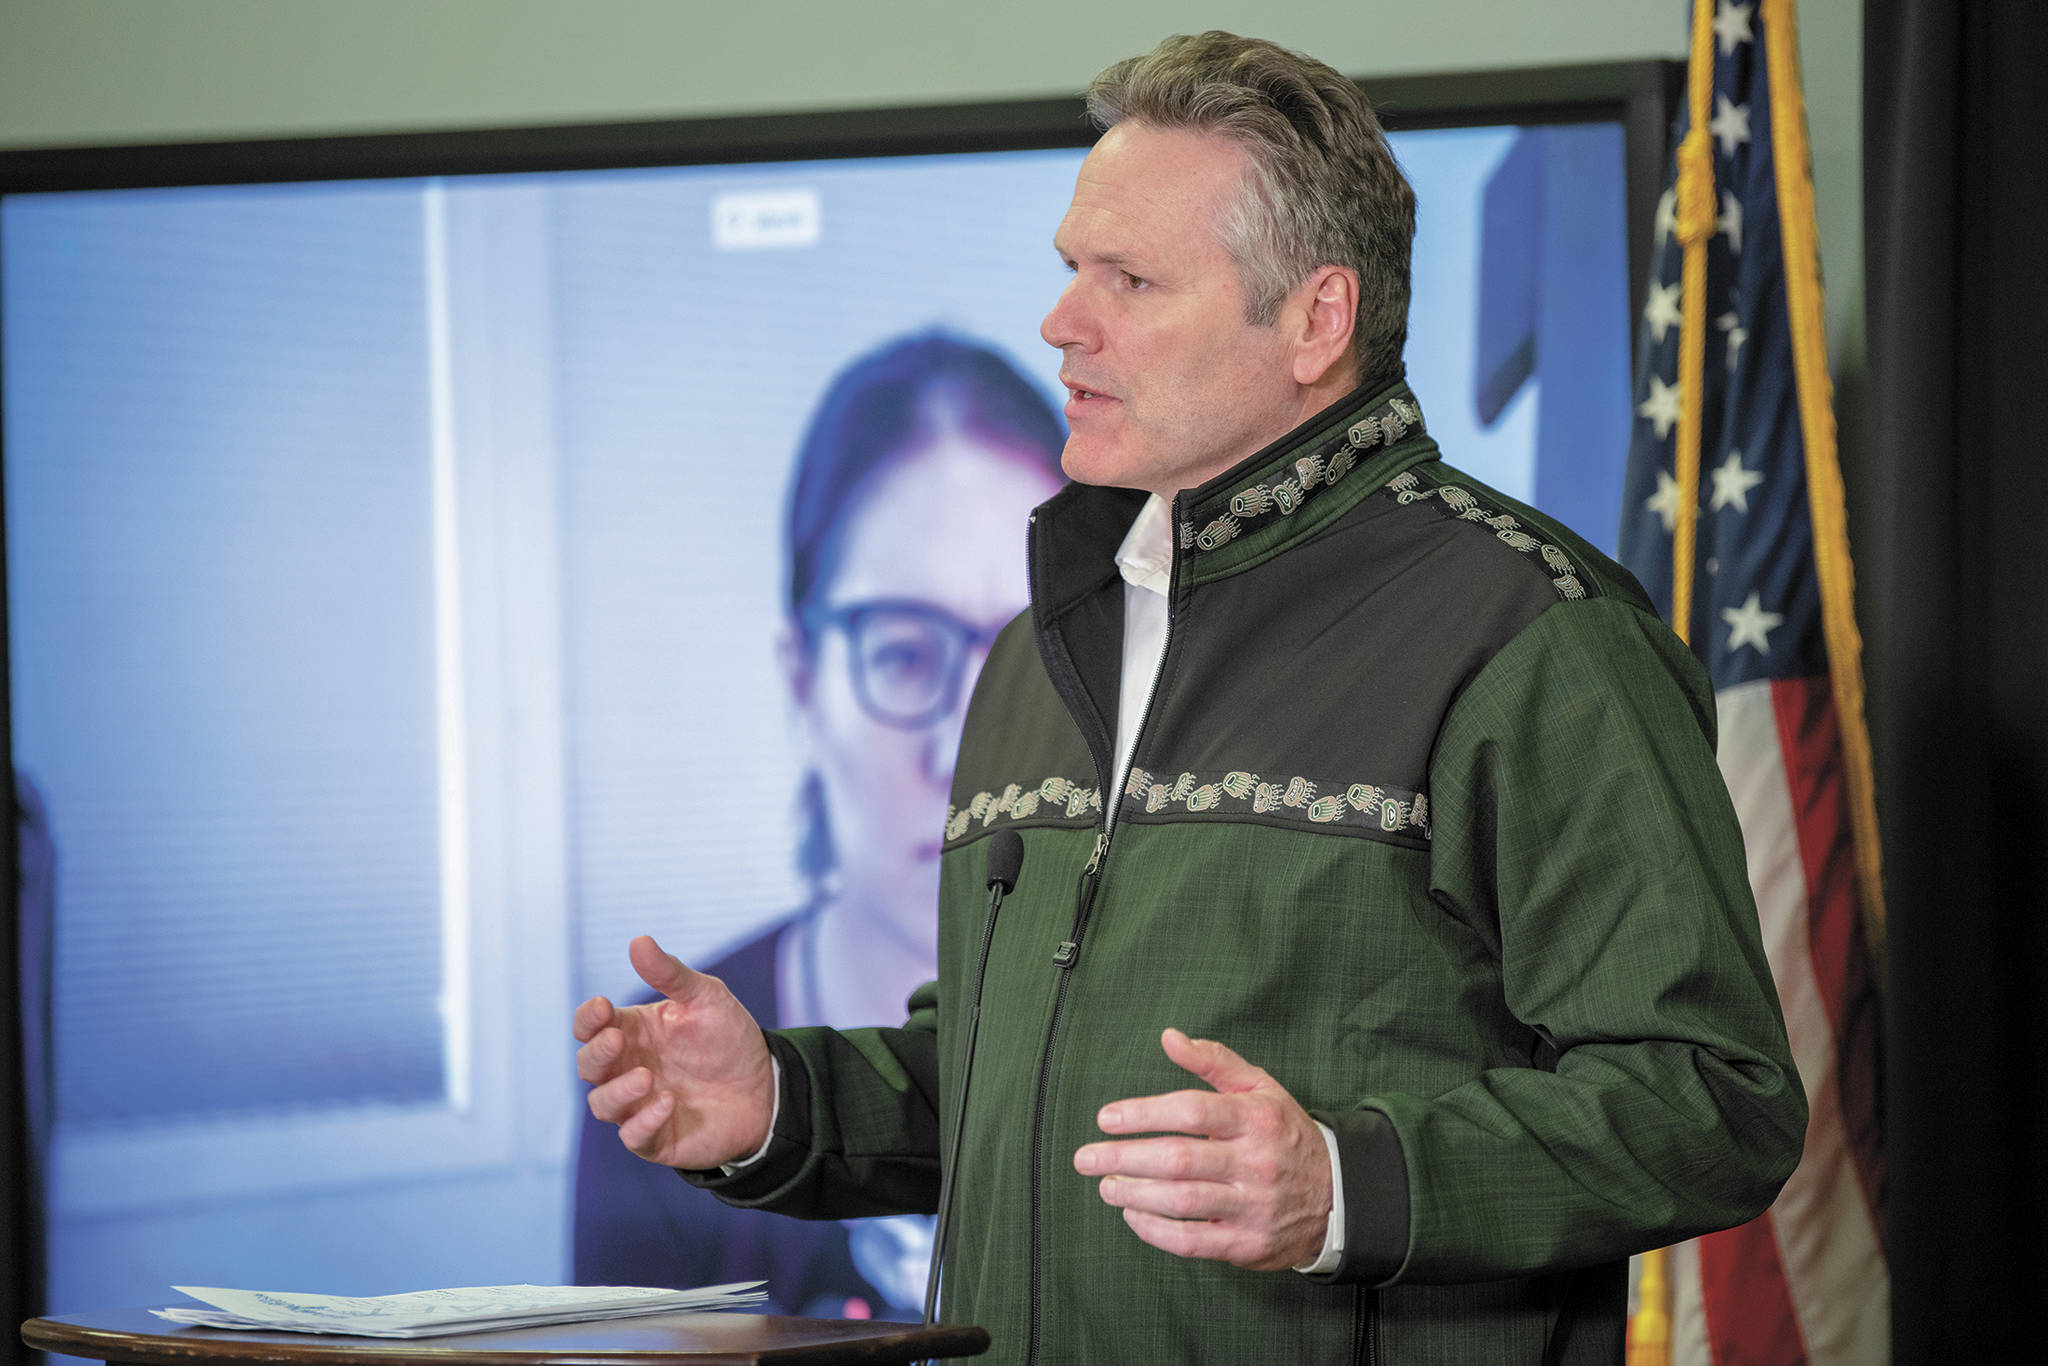 Gov. Mike Dunleavy speaks during a Tuesday, March 31, 2020 press conference in the Atwood Building in Anchorage, Alaska. (Photo courtesy Office of the Governor)